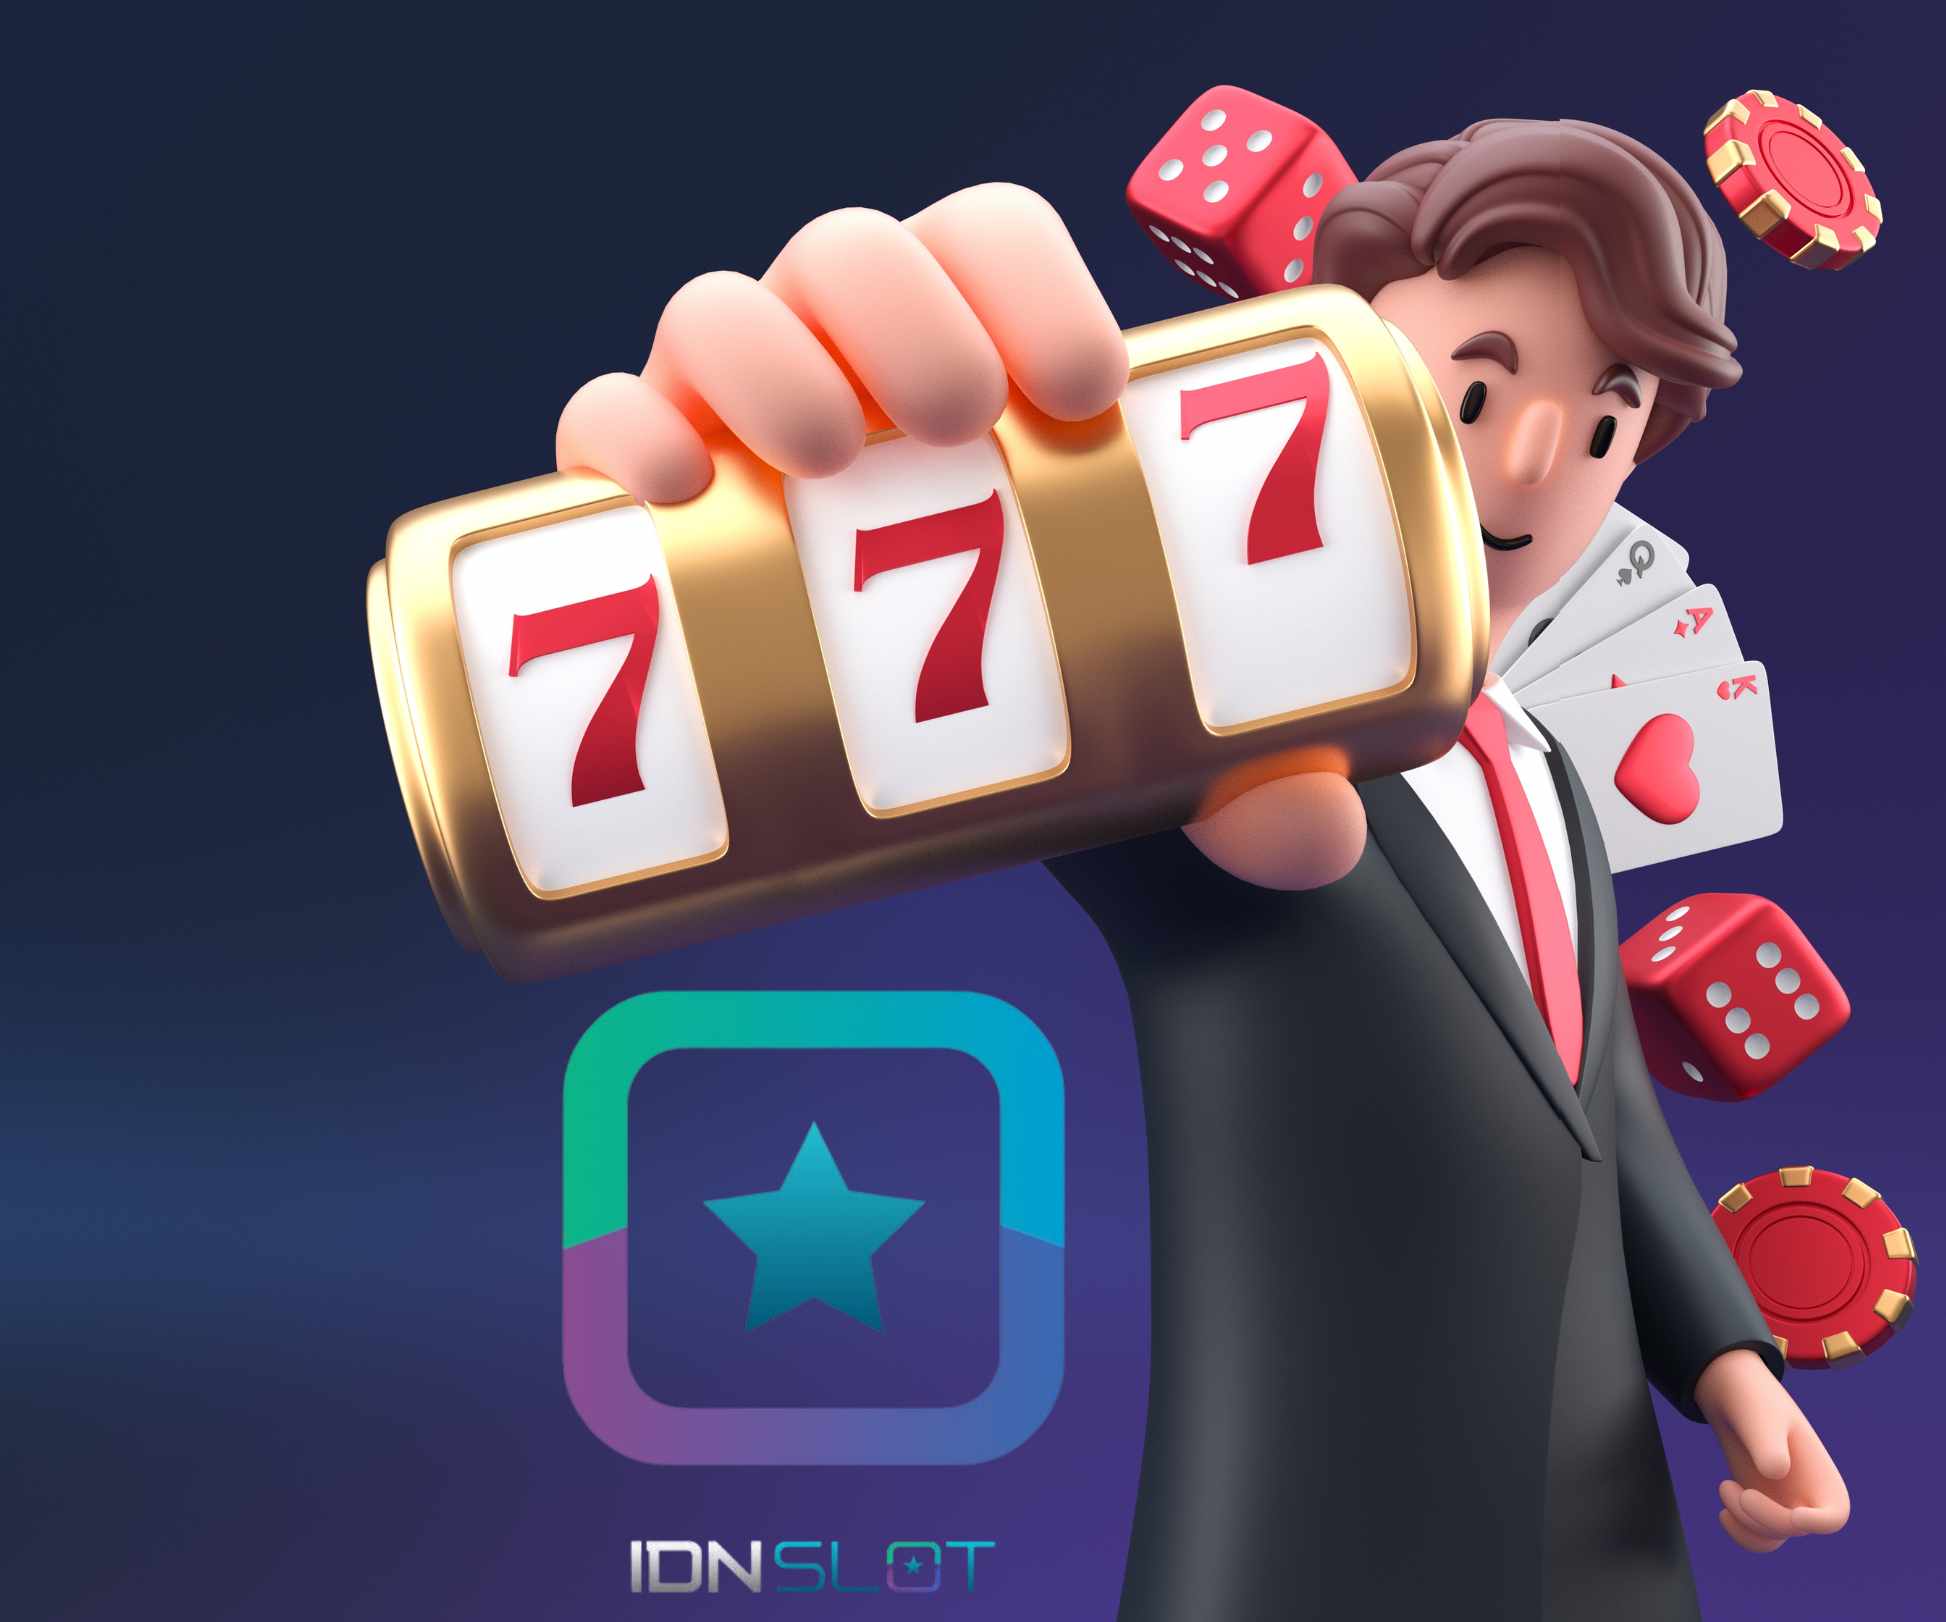 Idn Slot is a complete variety of slot games this year